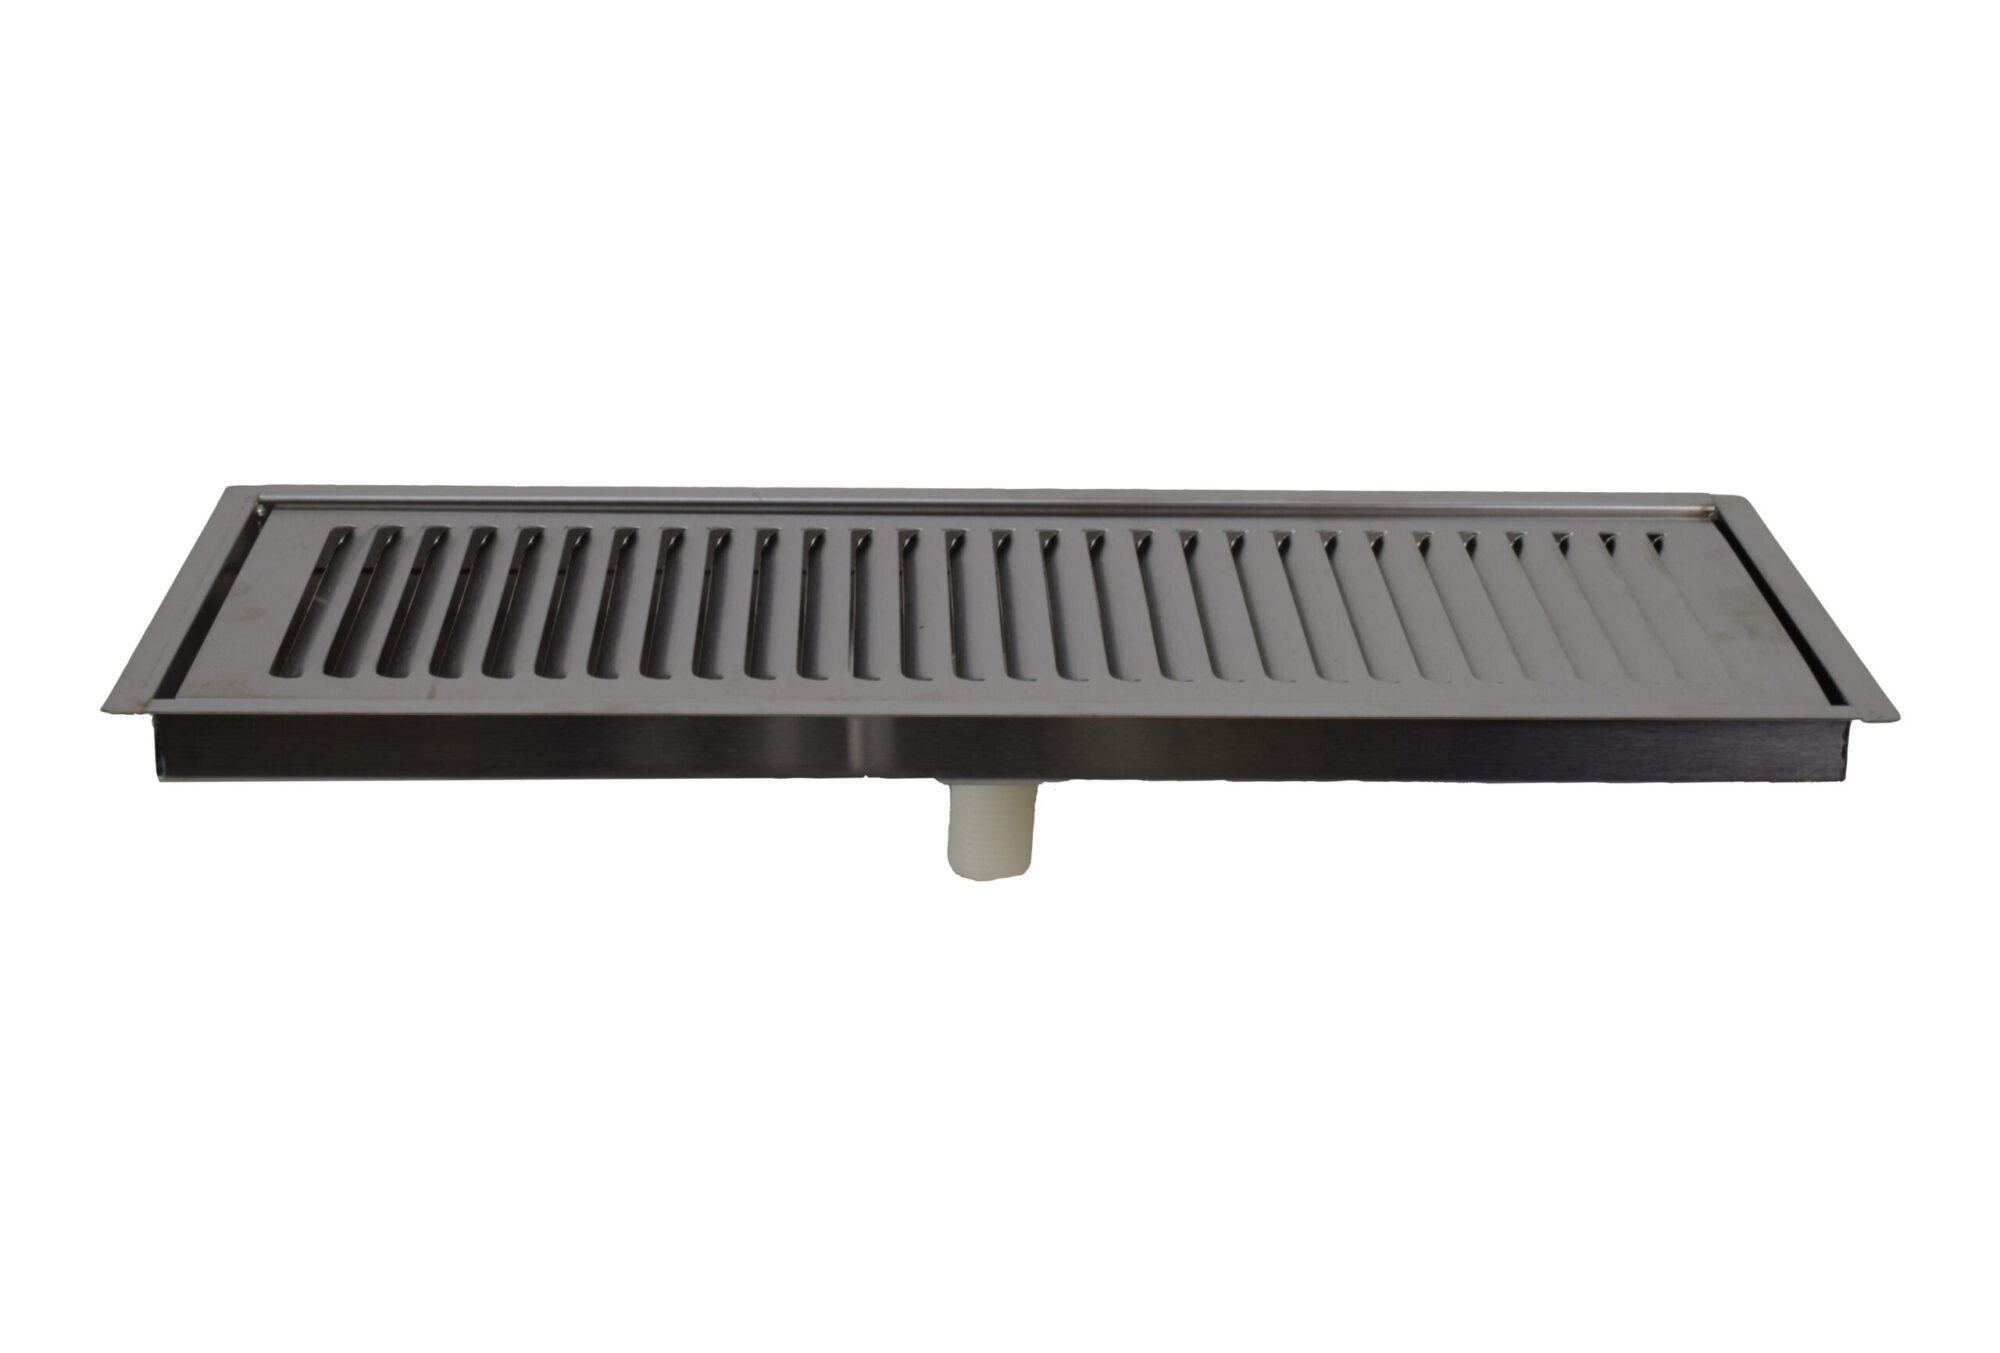 616FLM Stainless Steel Flush Mount Tray with Drain and S/S Grid- 24"L x 5 3/8"W x 3/4"D